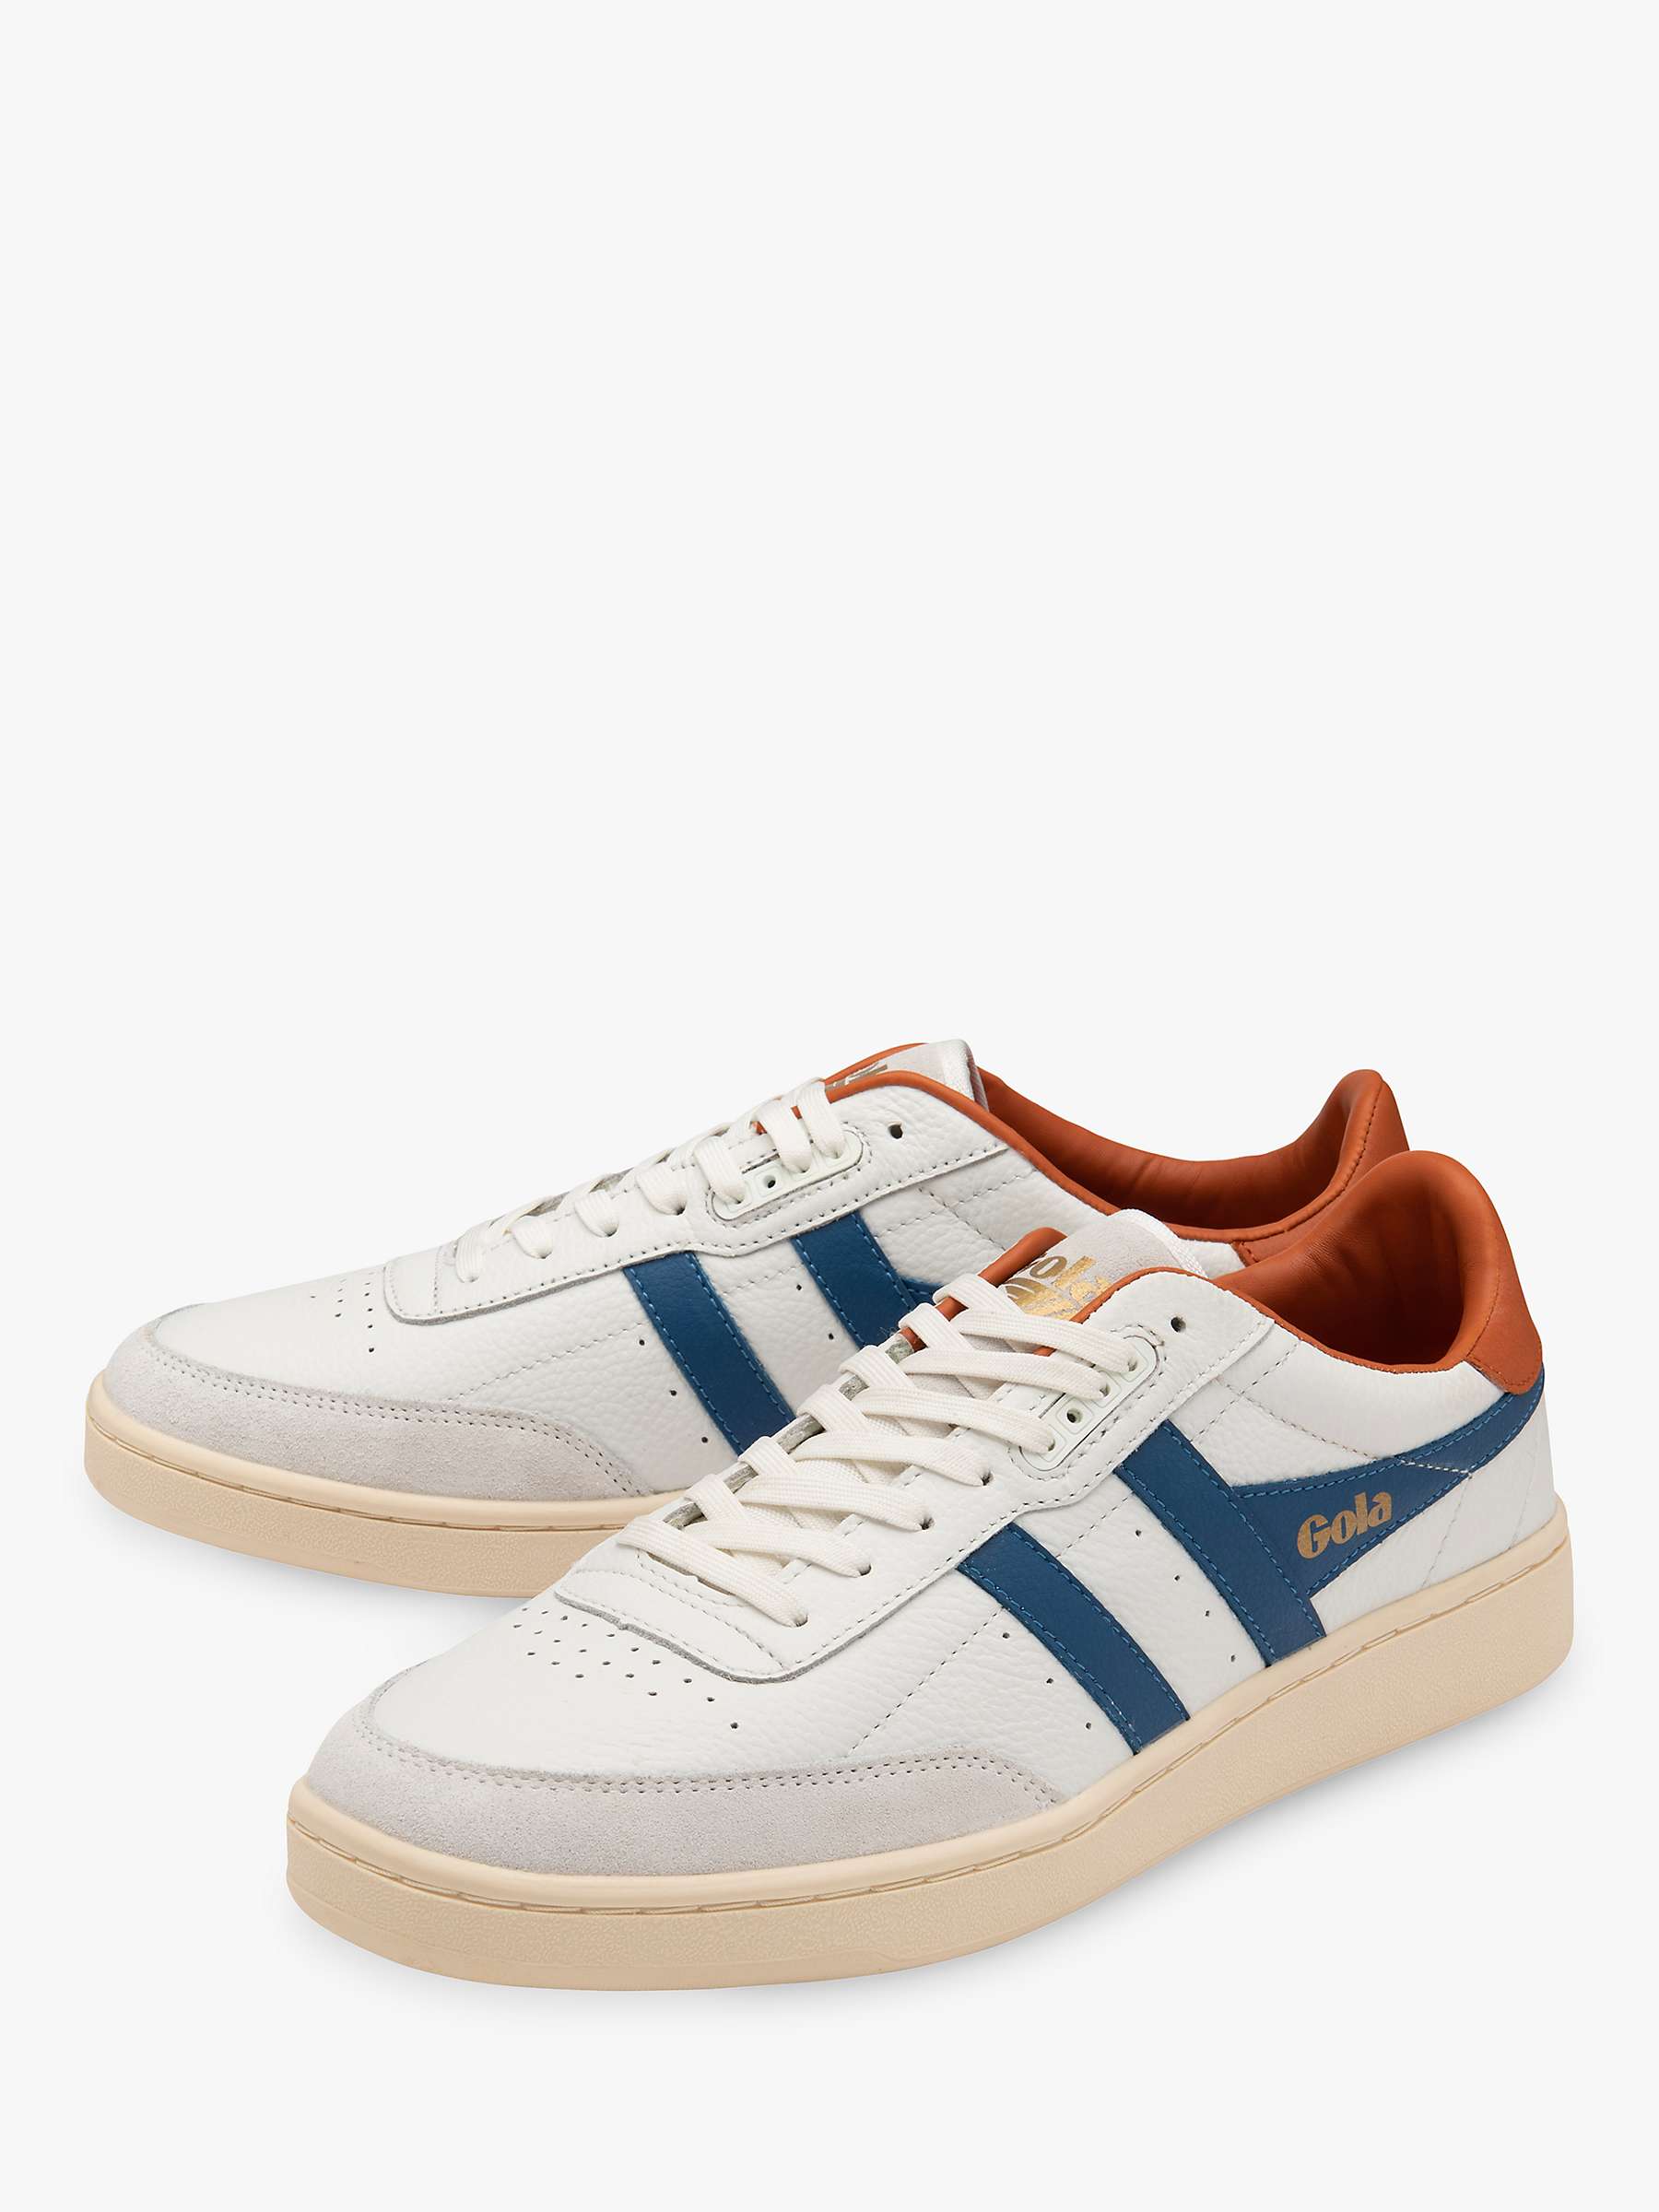 Buy Gola Classics Contact Leather Lace Up Trainers Online at johnlewis.com